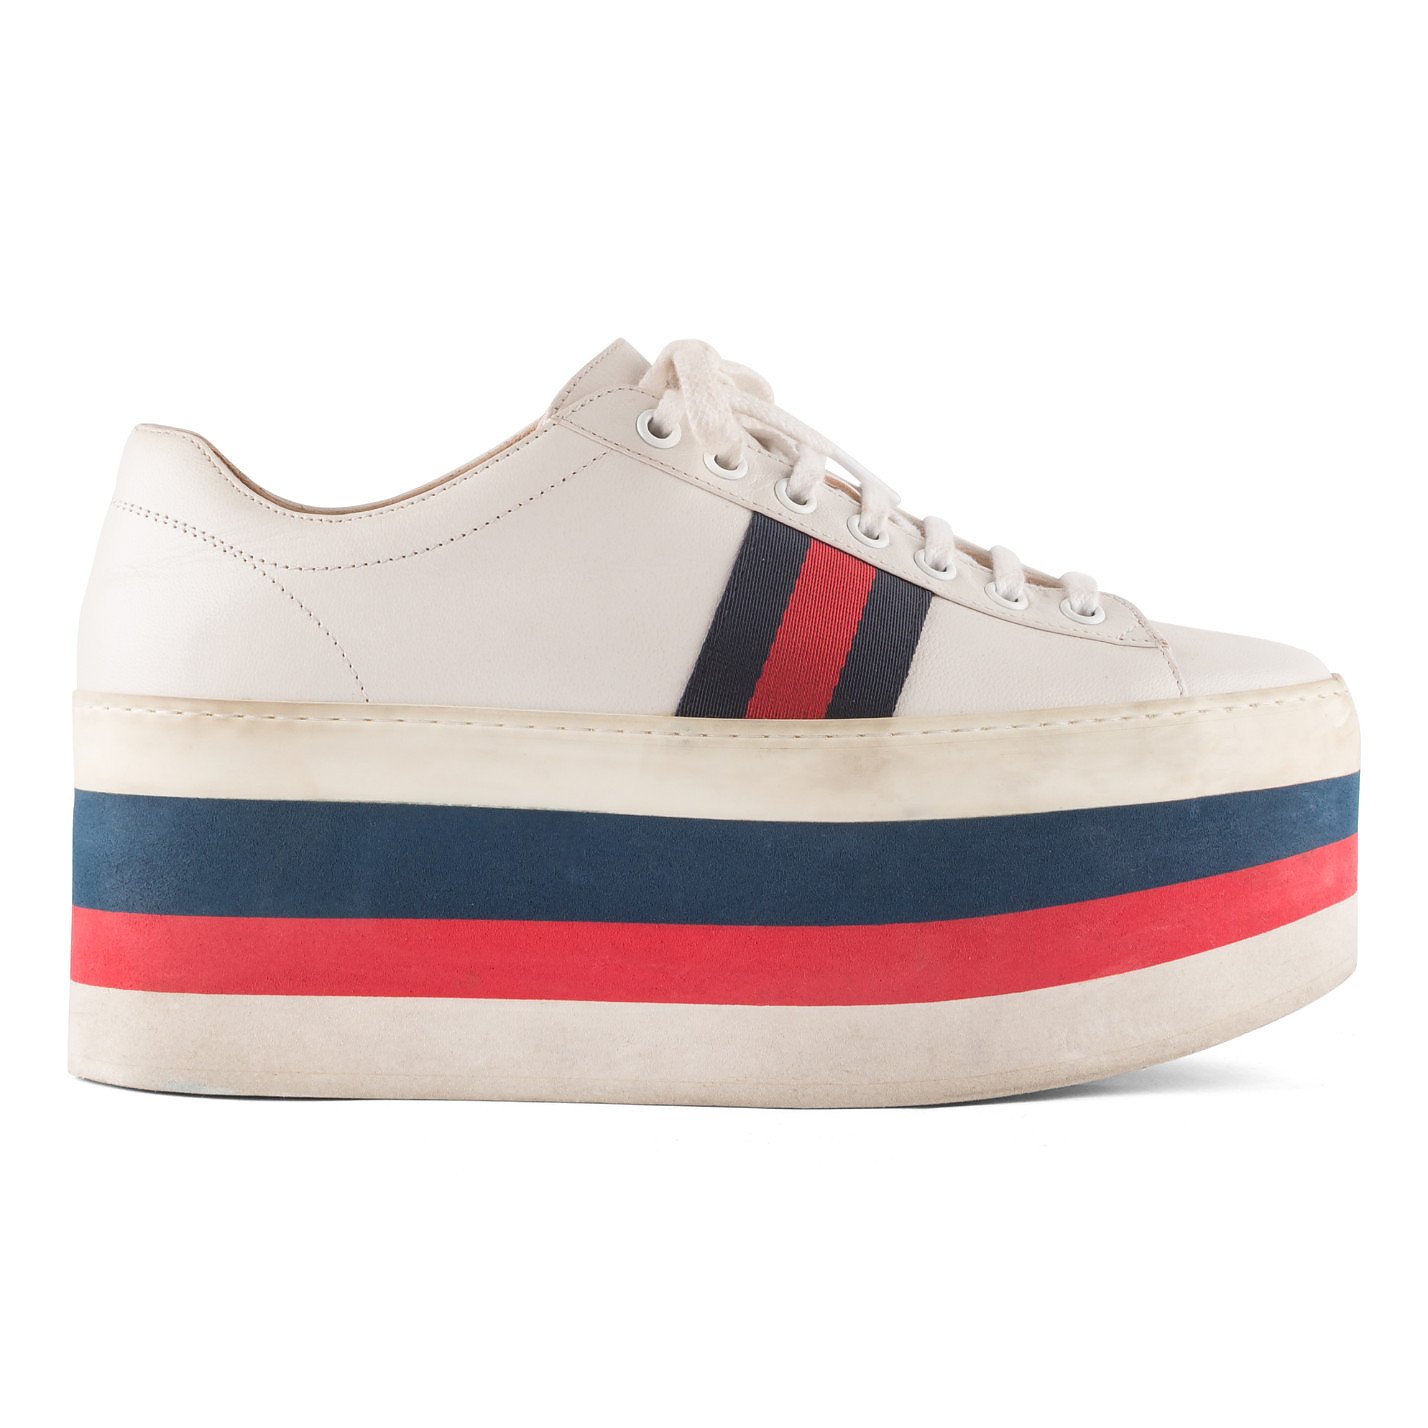 Gucci Leather Platform Sneakers 